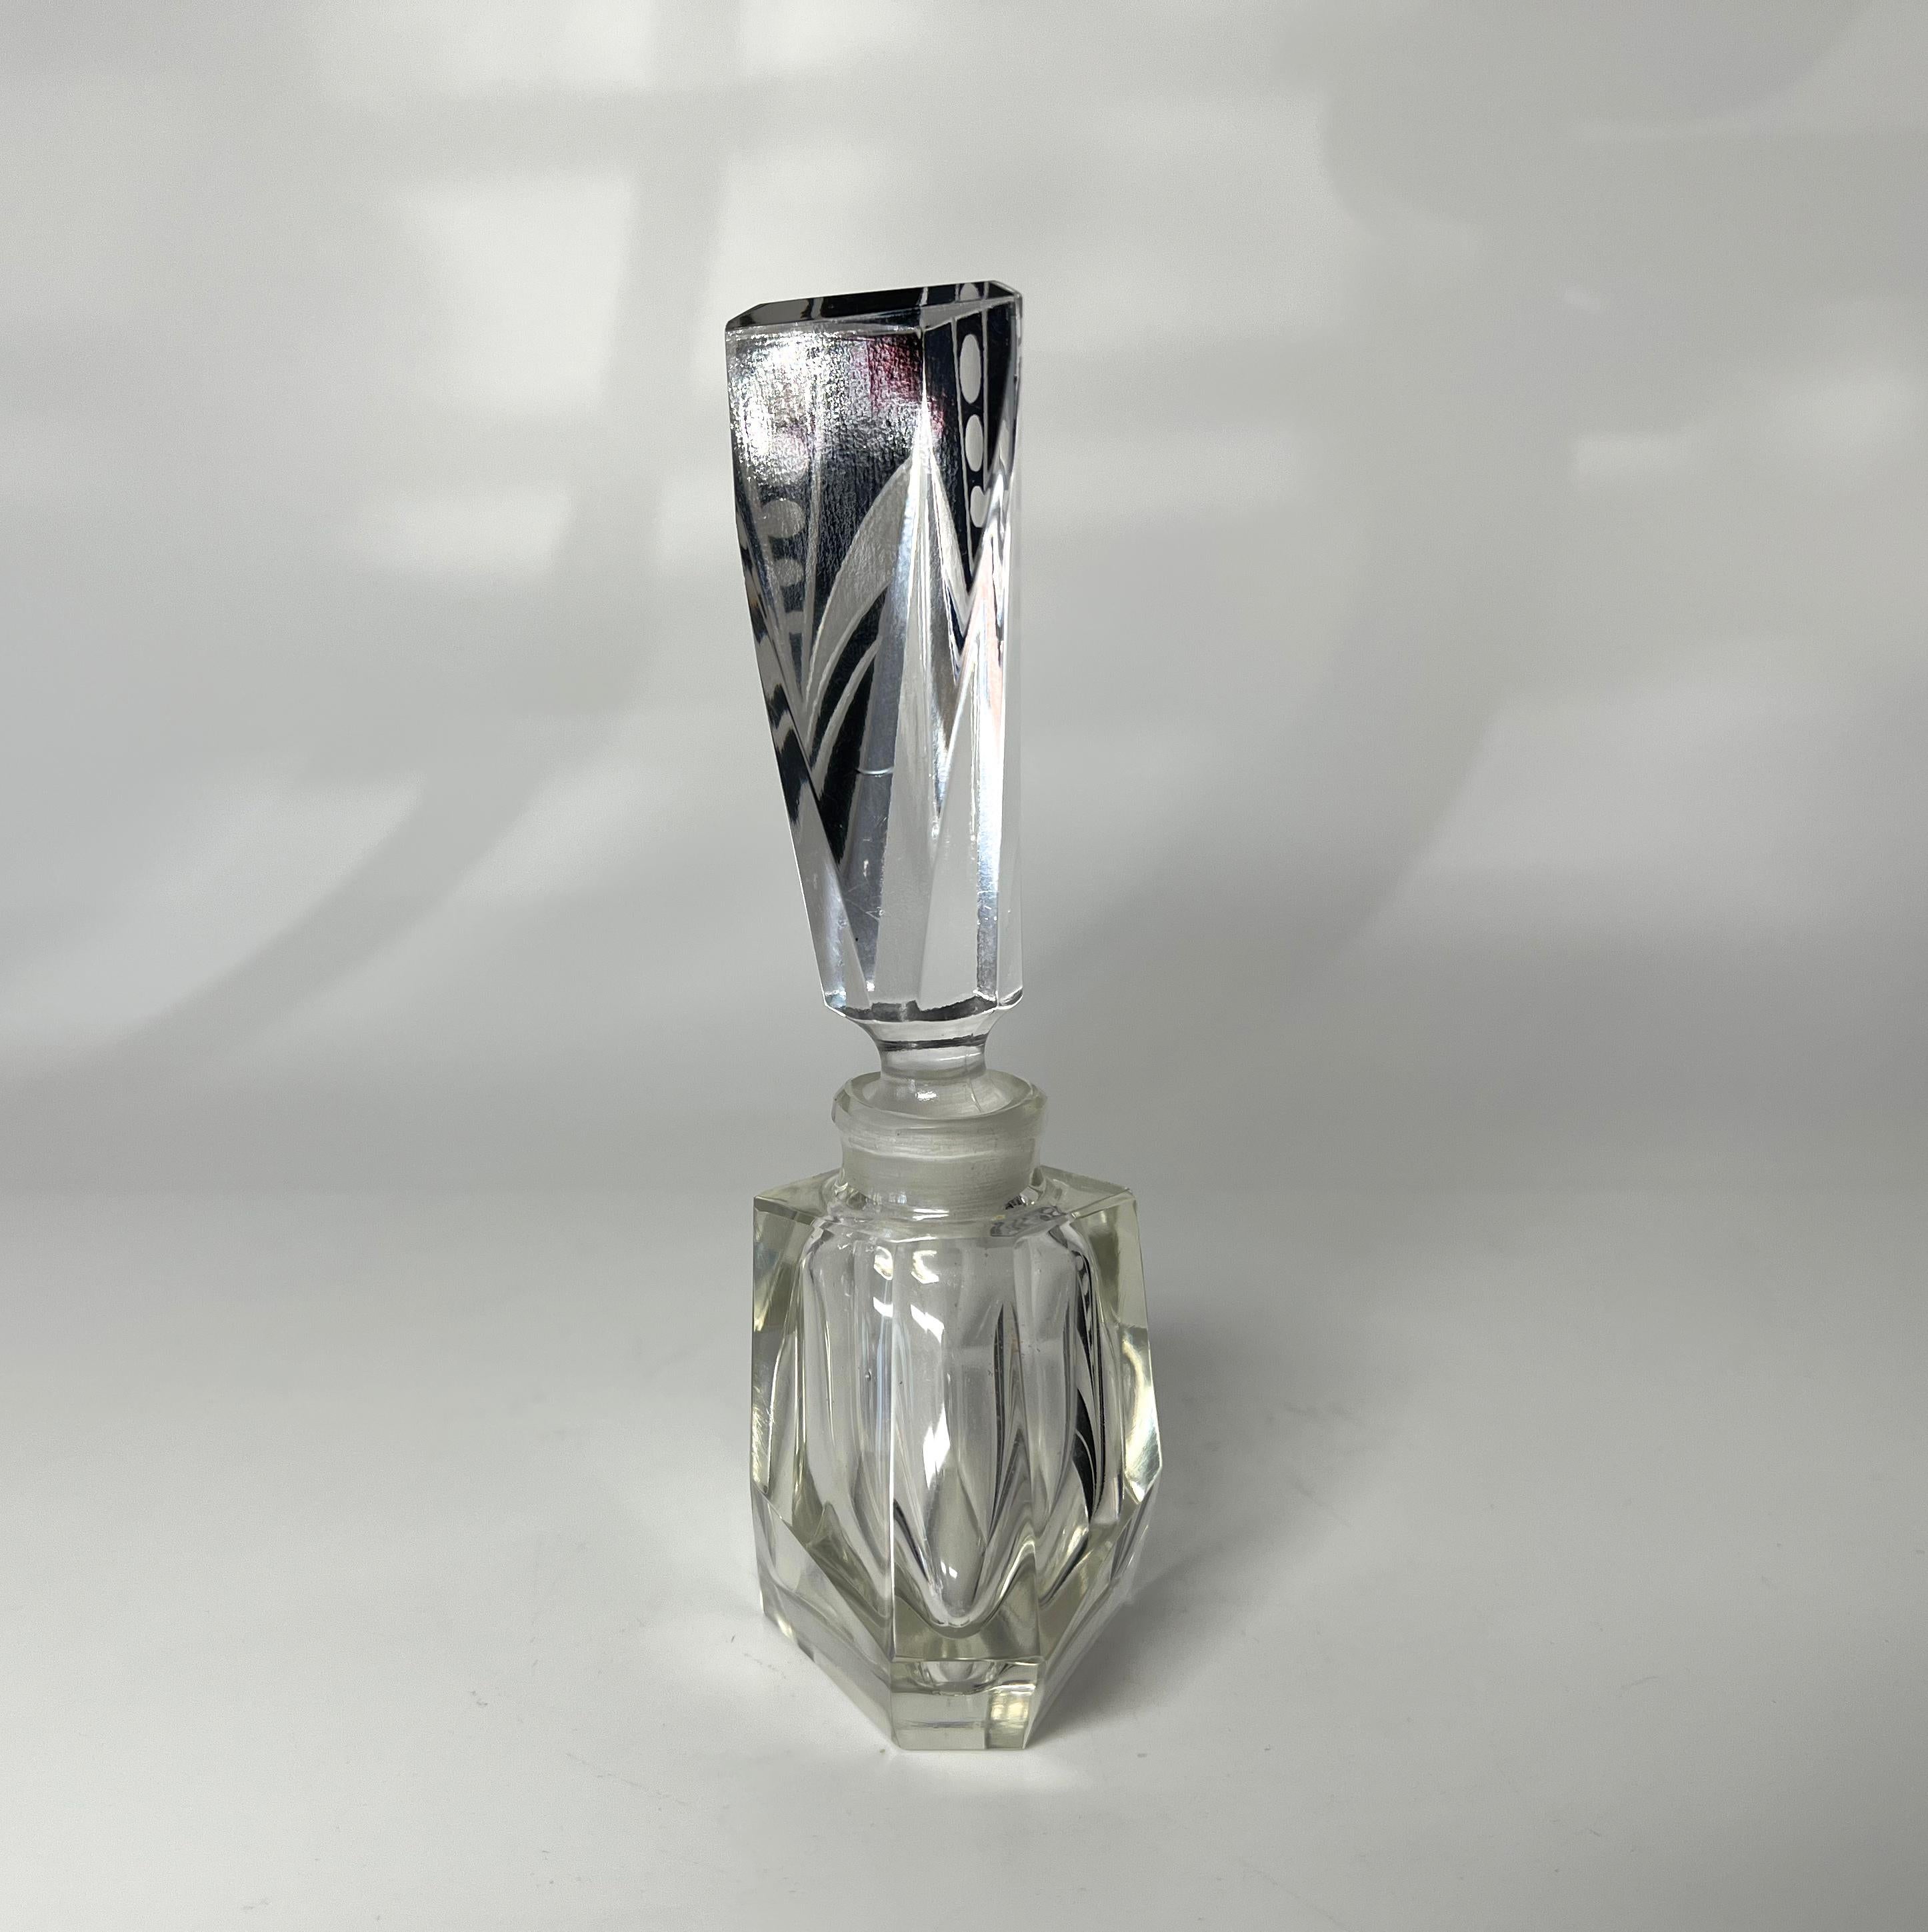 Exquisite Geometric Czech Art Deco Black Enamel Crystal Perfume Bottle 1930's In Good Condition For Sale In Rothley, Leicestershire